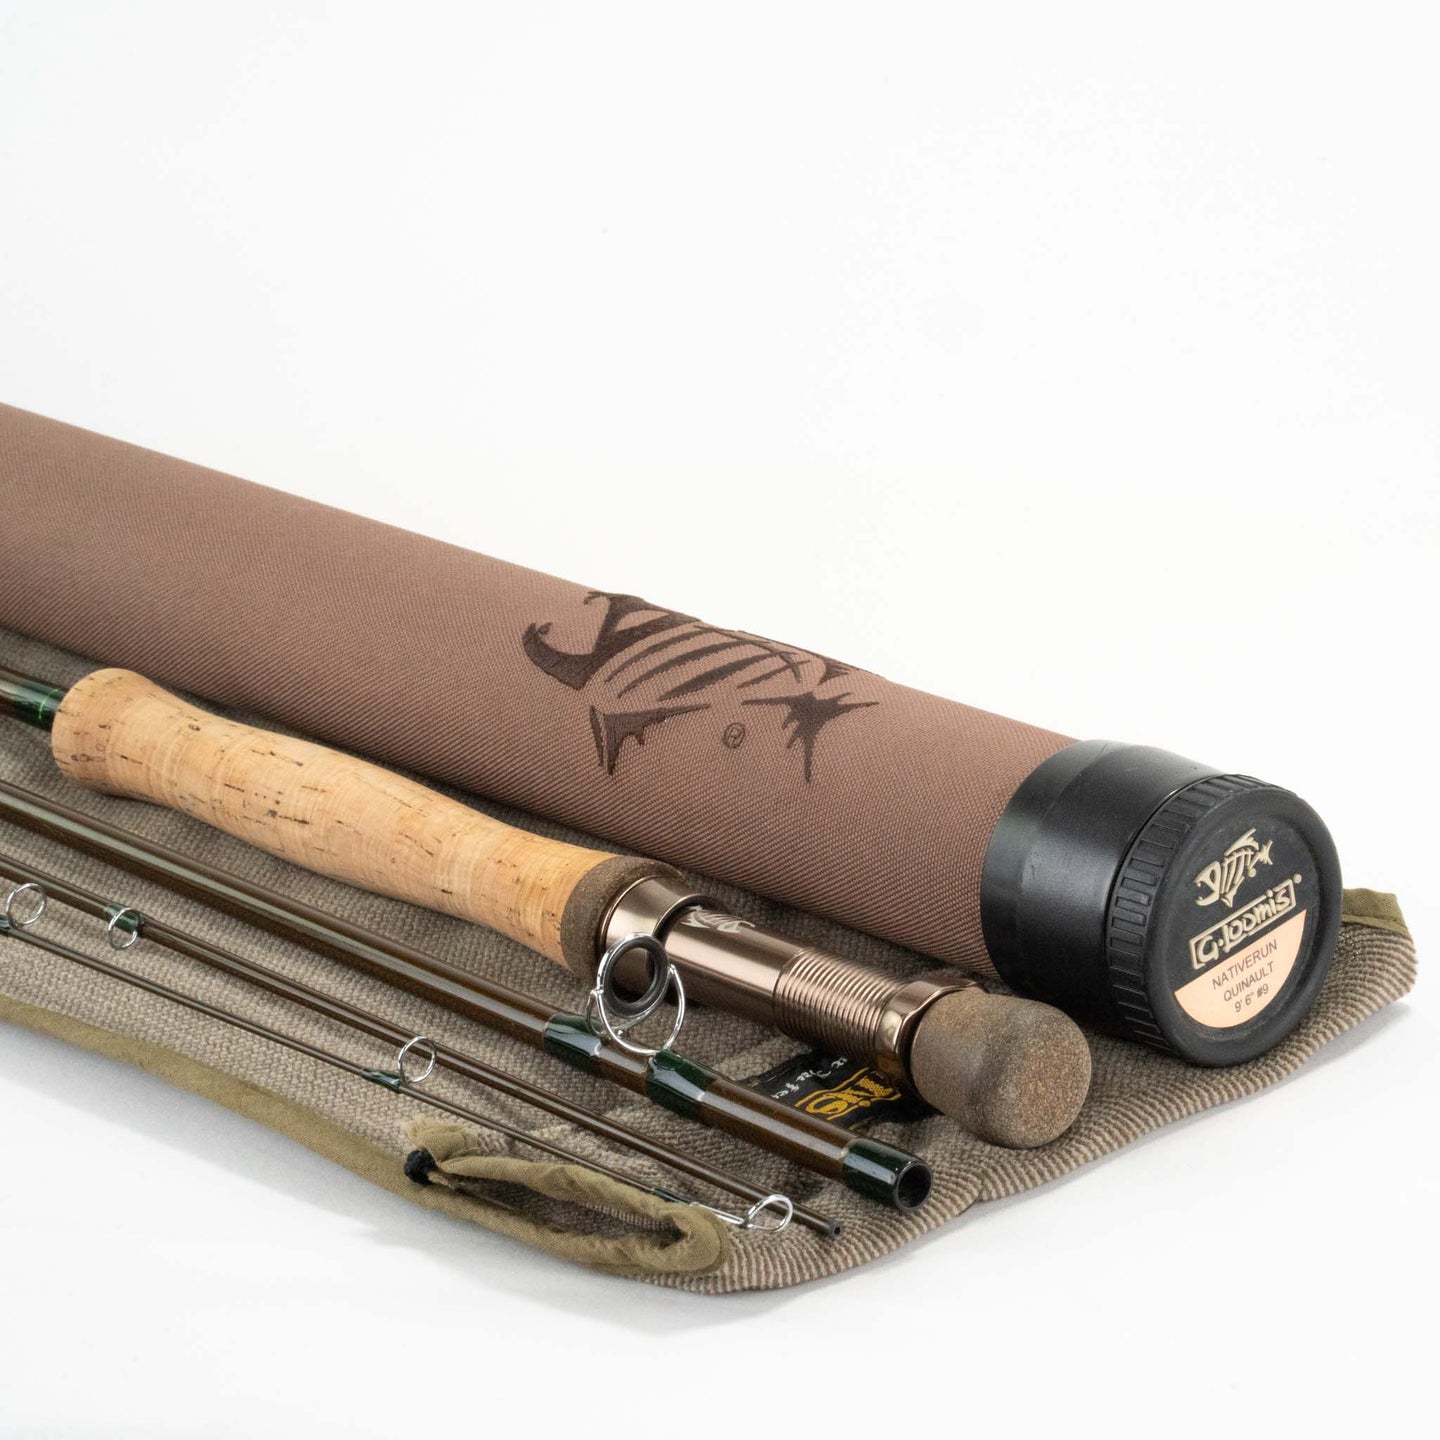 GLoomis Native Run Quinault 996-4 Fly Rod - 9wt 9ft 6in 4pc